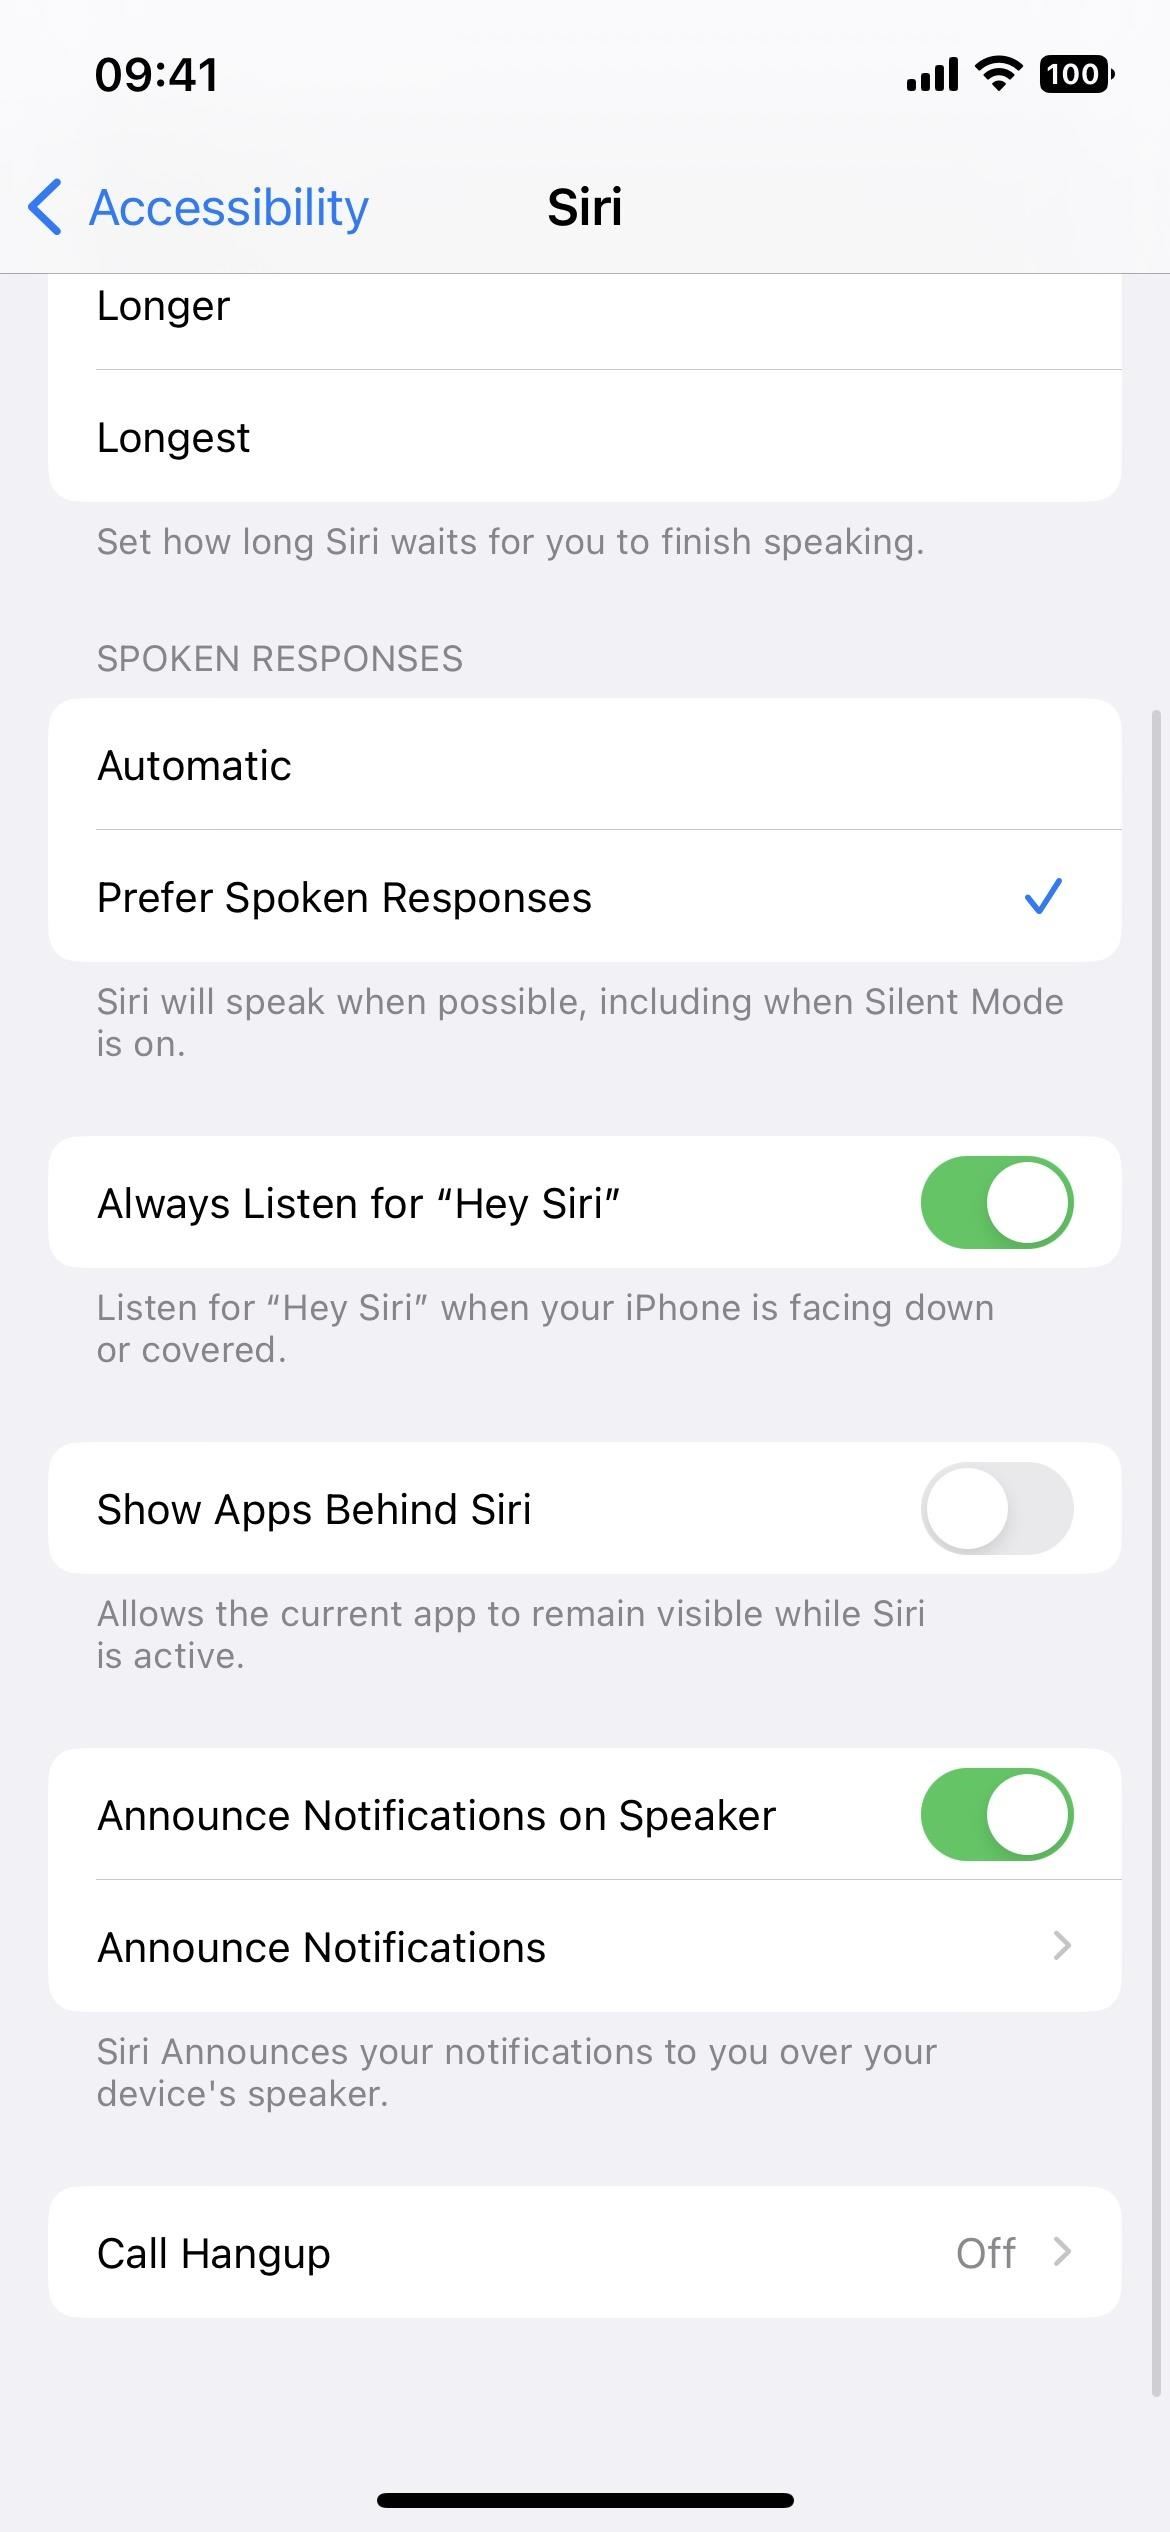 The Massive Accessibility Update for iPhone You Shouldn't Ignore